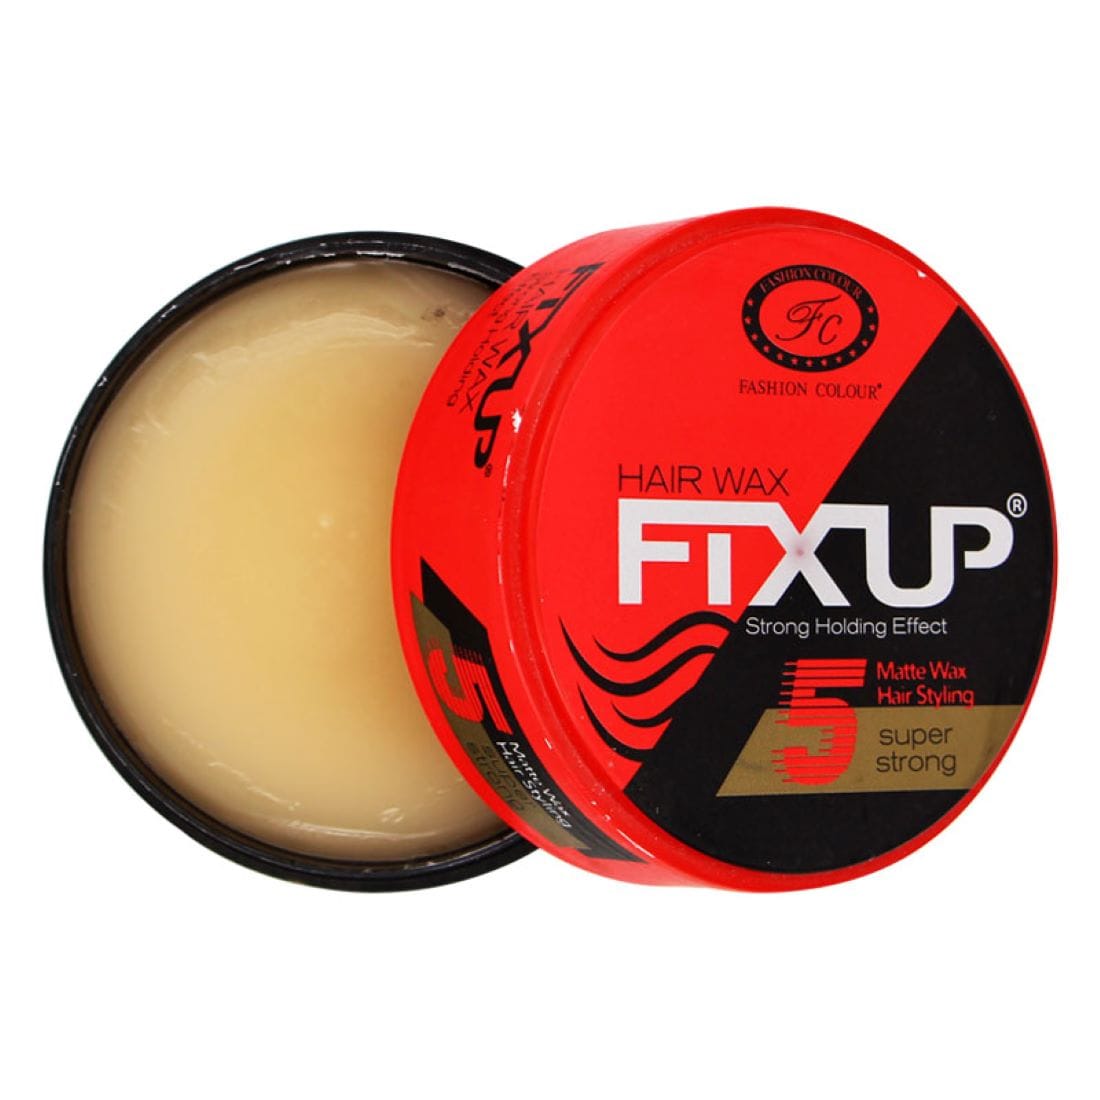 Hair Wax for Men Get a style makeover with these best hair wax for men   Best Products  Times of India